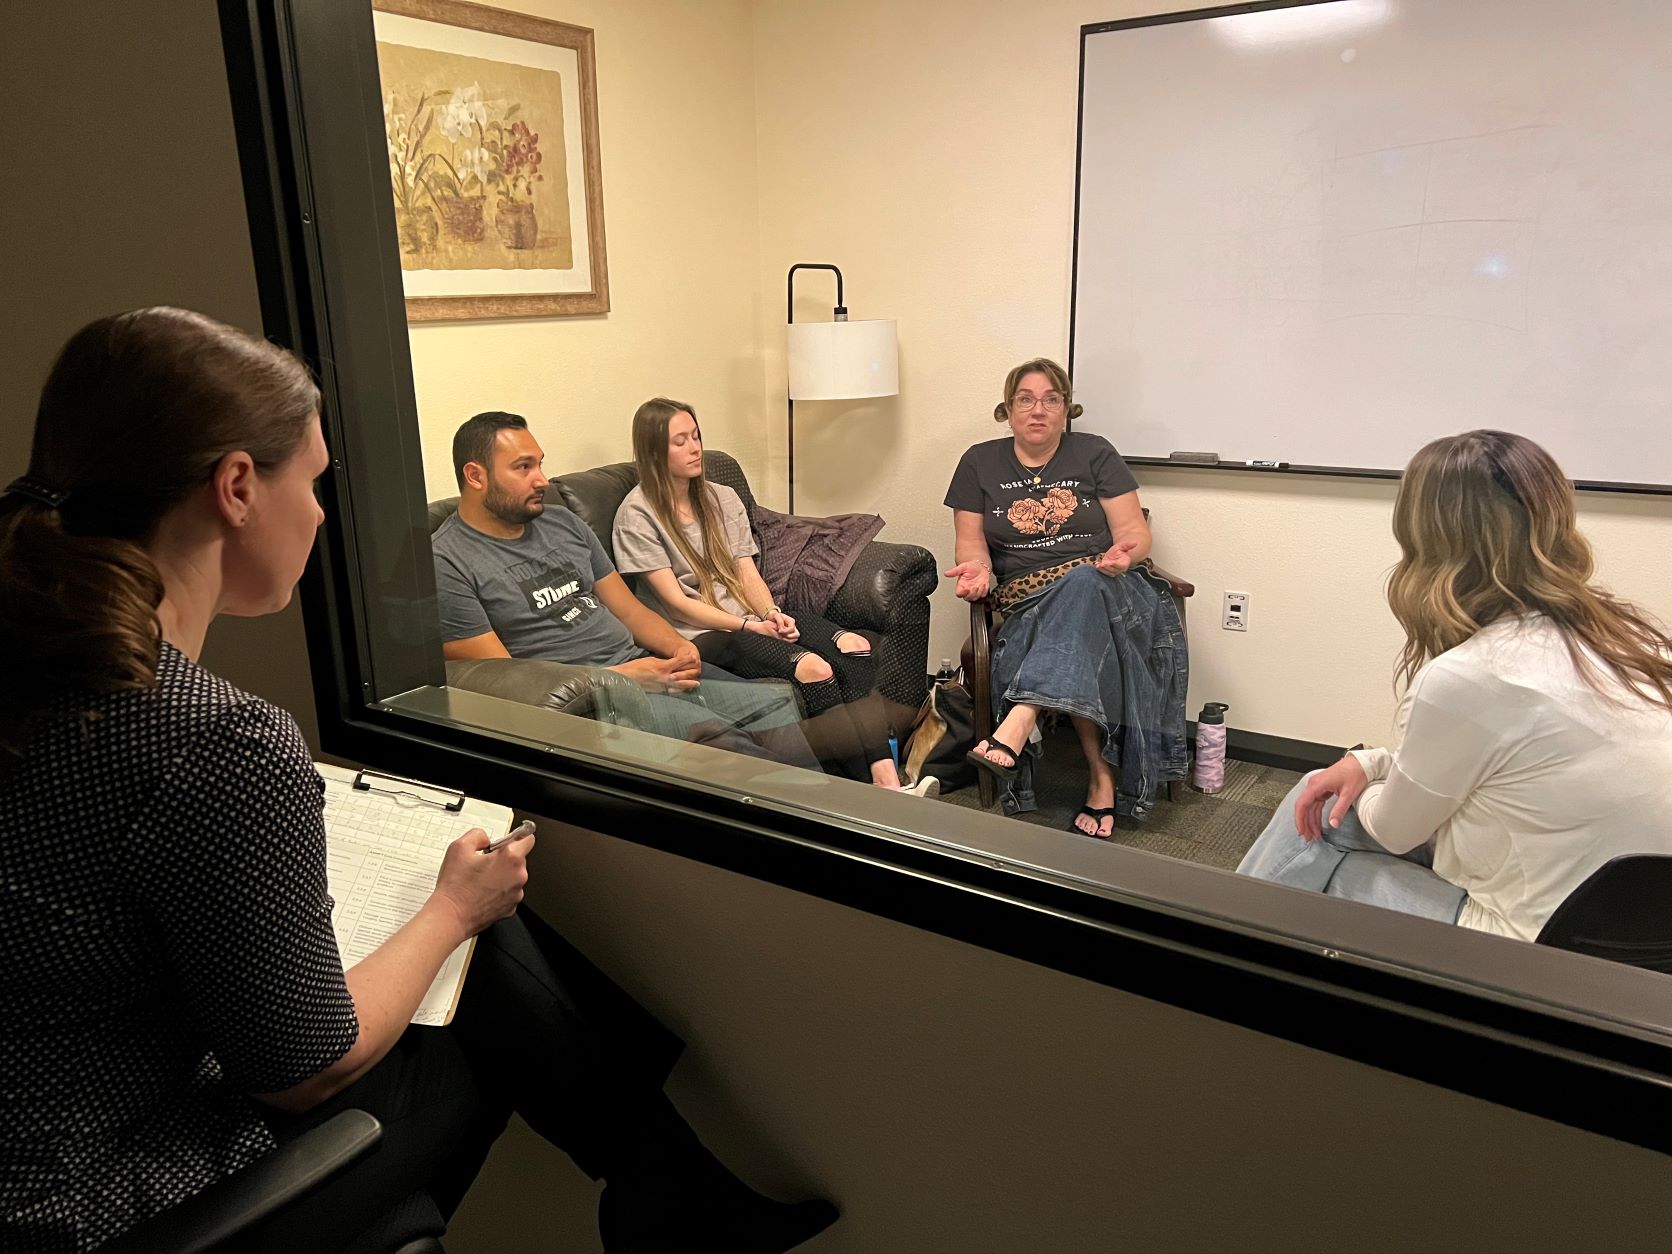 Therapist with 3 clients being observed